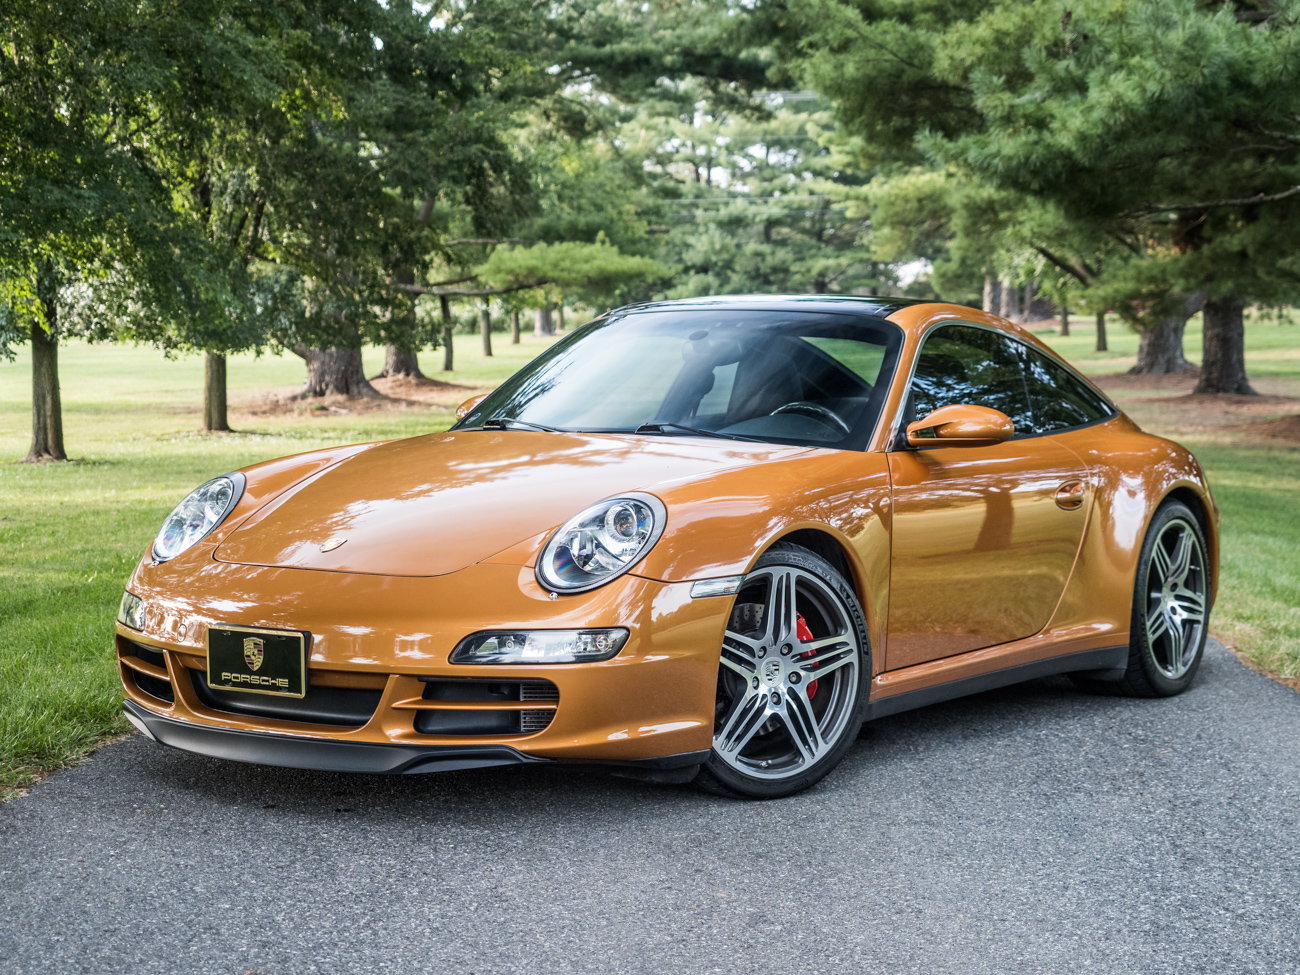 2007 Porsche 911 - 2007 911 Targa 4S - Nordic Gold Metallic - Used - VIN WP0BB29907S755115 - 34,600 Miles - 6 cyl - 4WD - Manual - Hatchback - Other - Silver Spring, MD 20901, United States